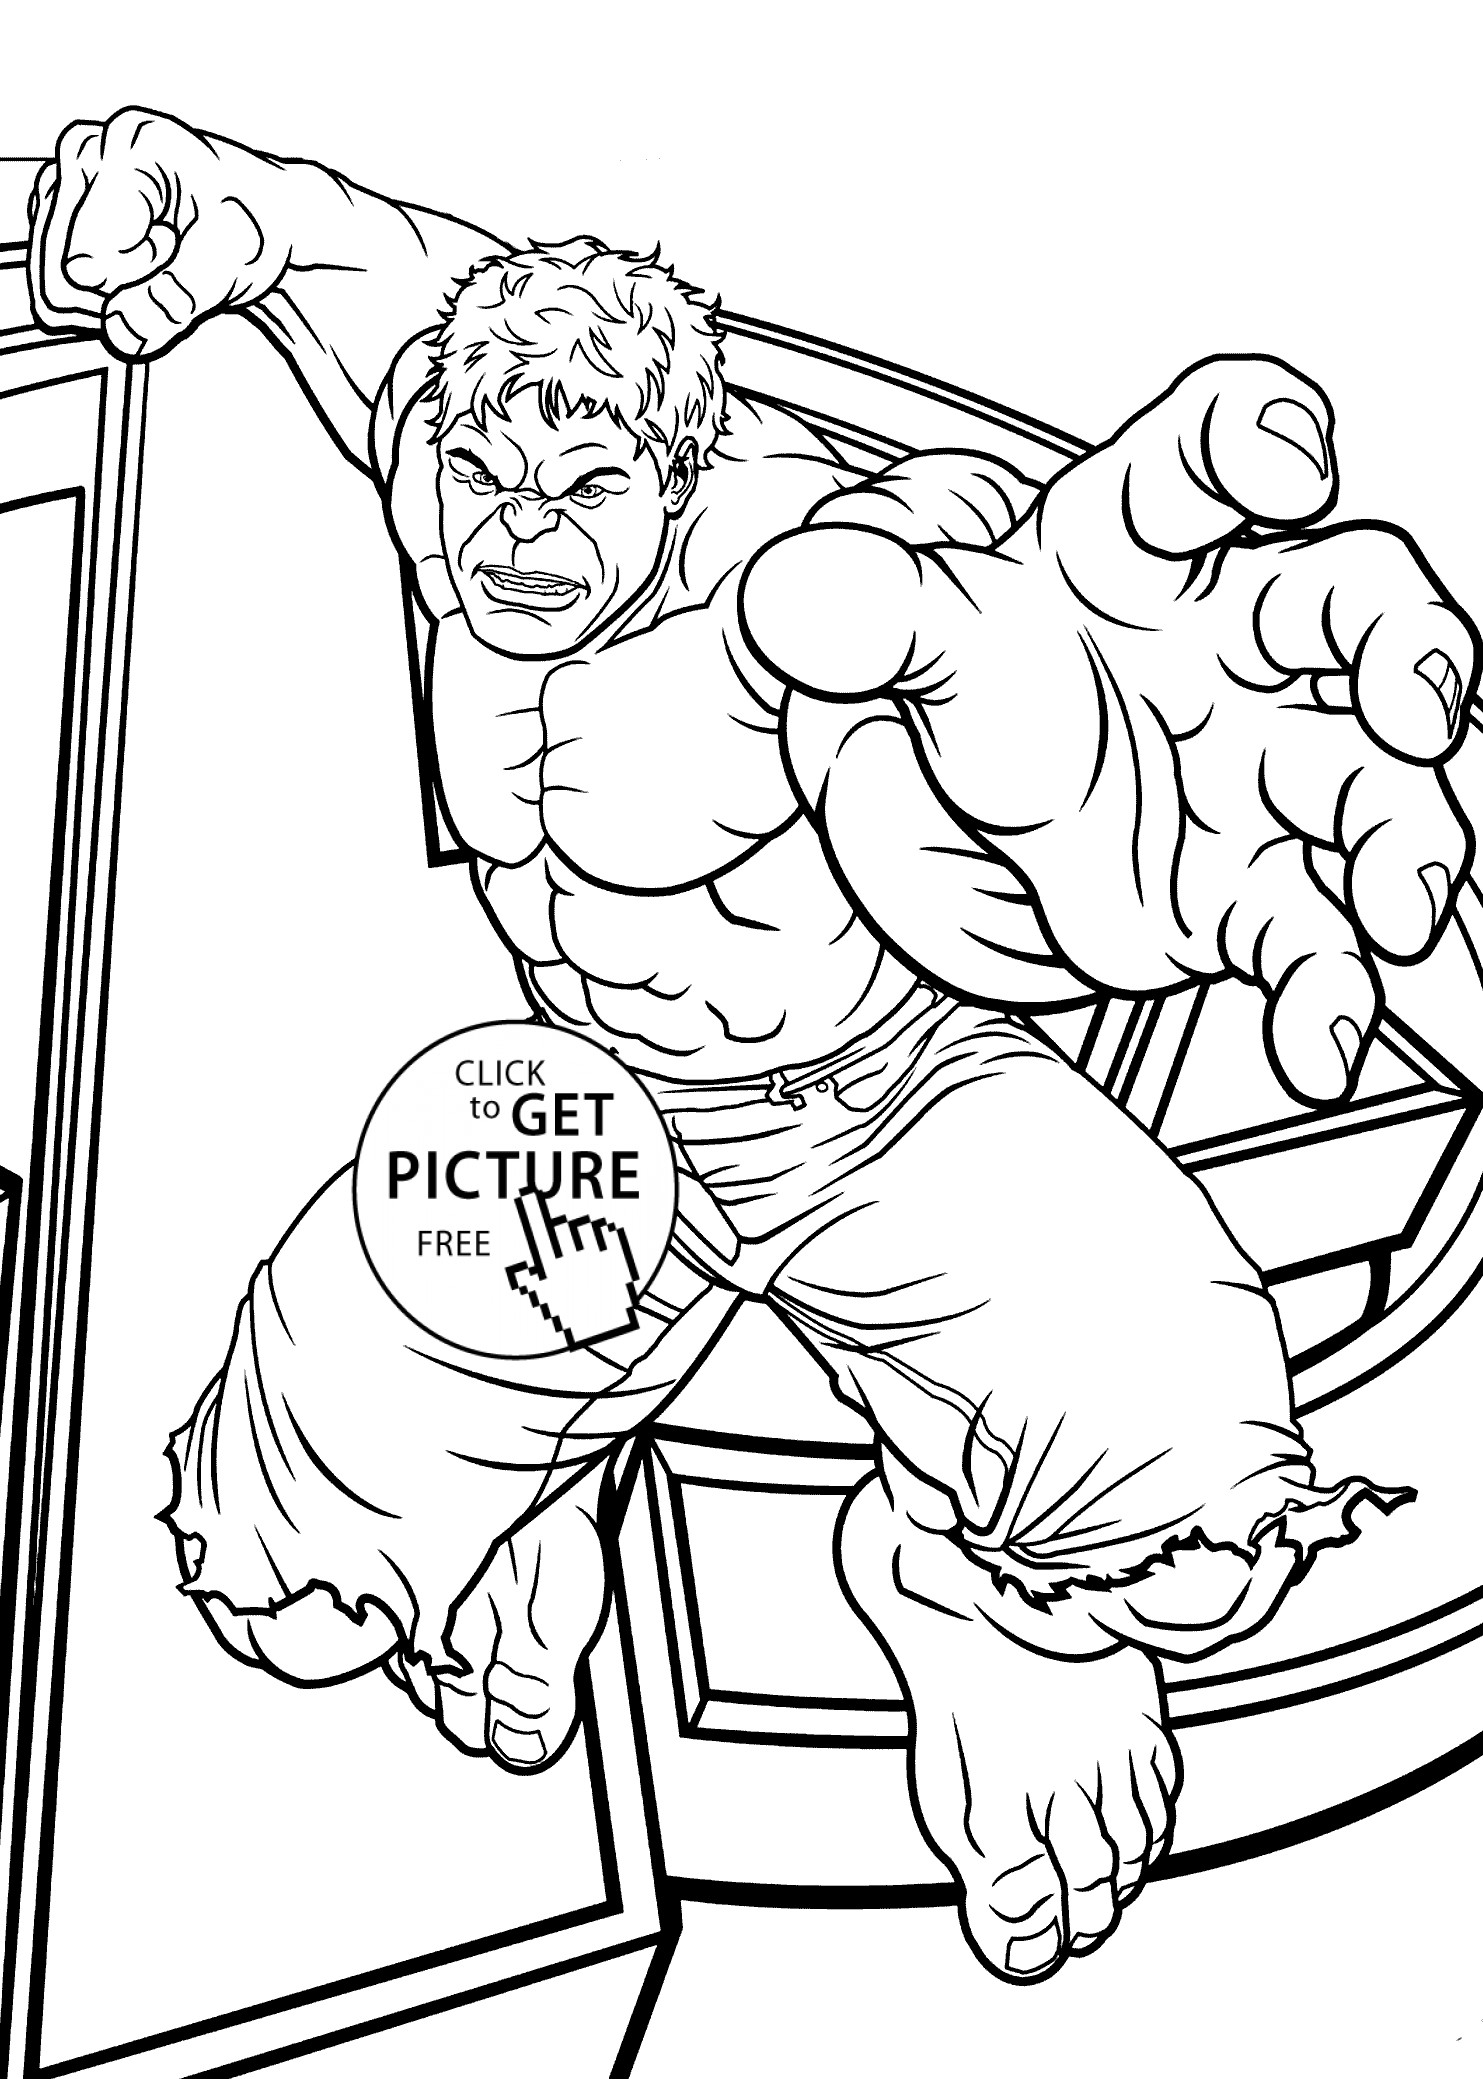 Free Printable Coloring Pages For Toddlers
 Hulk jumps coloring pages for kids printable free